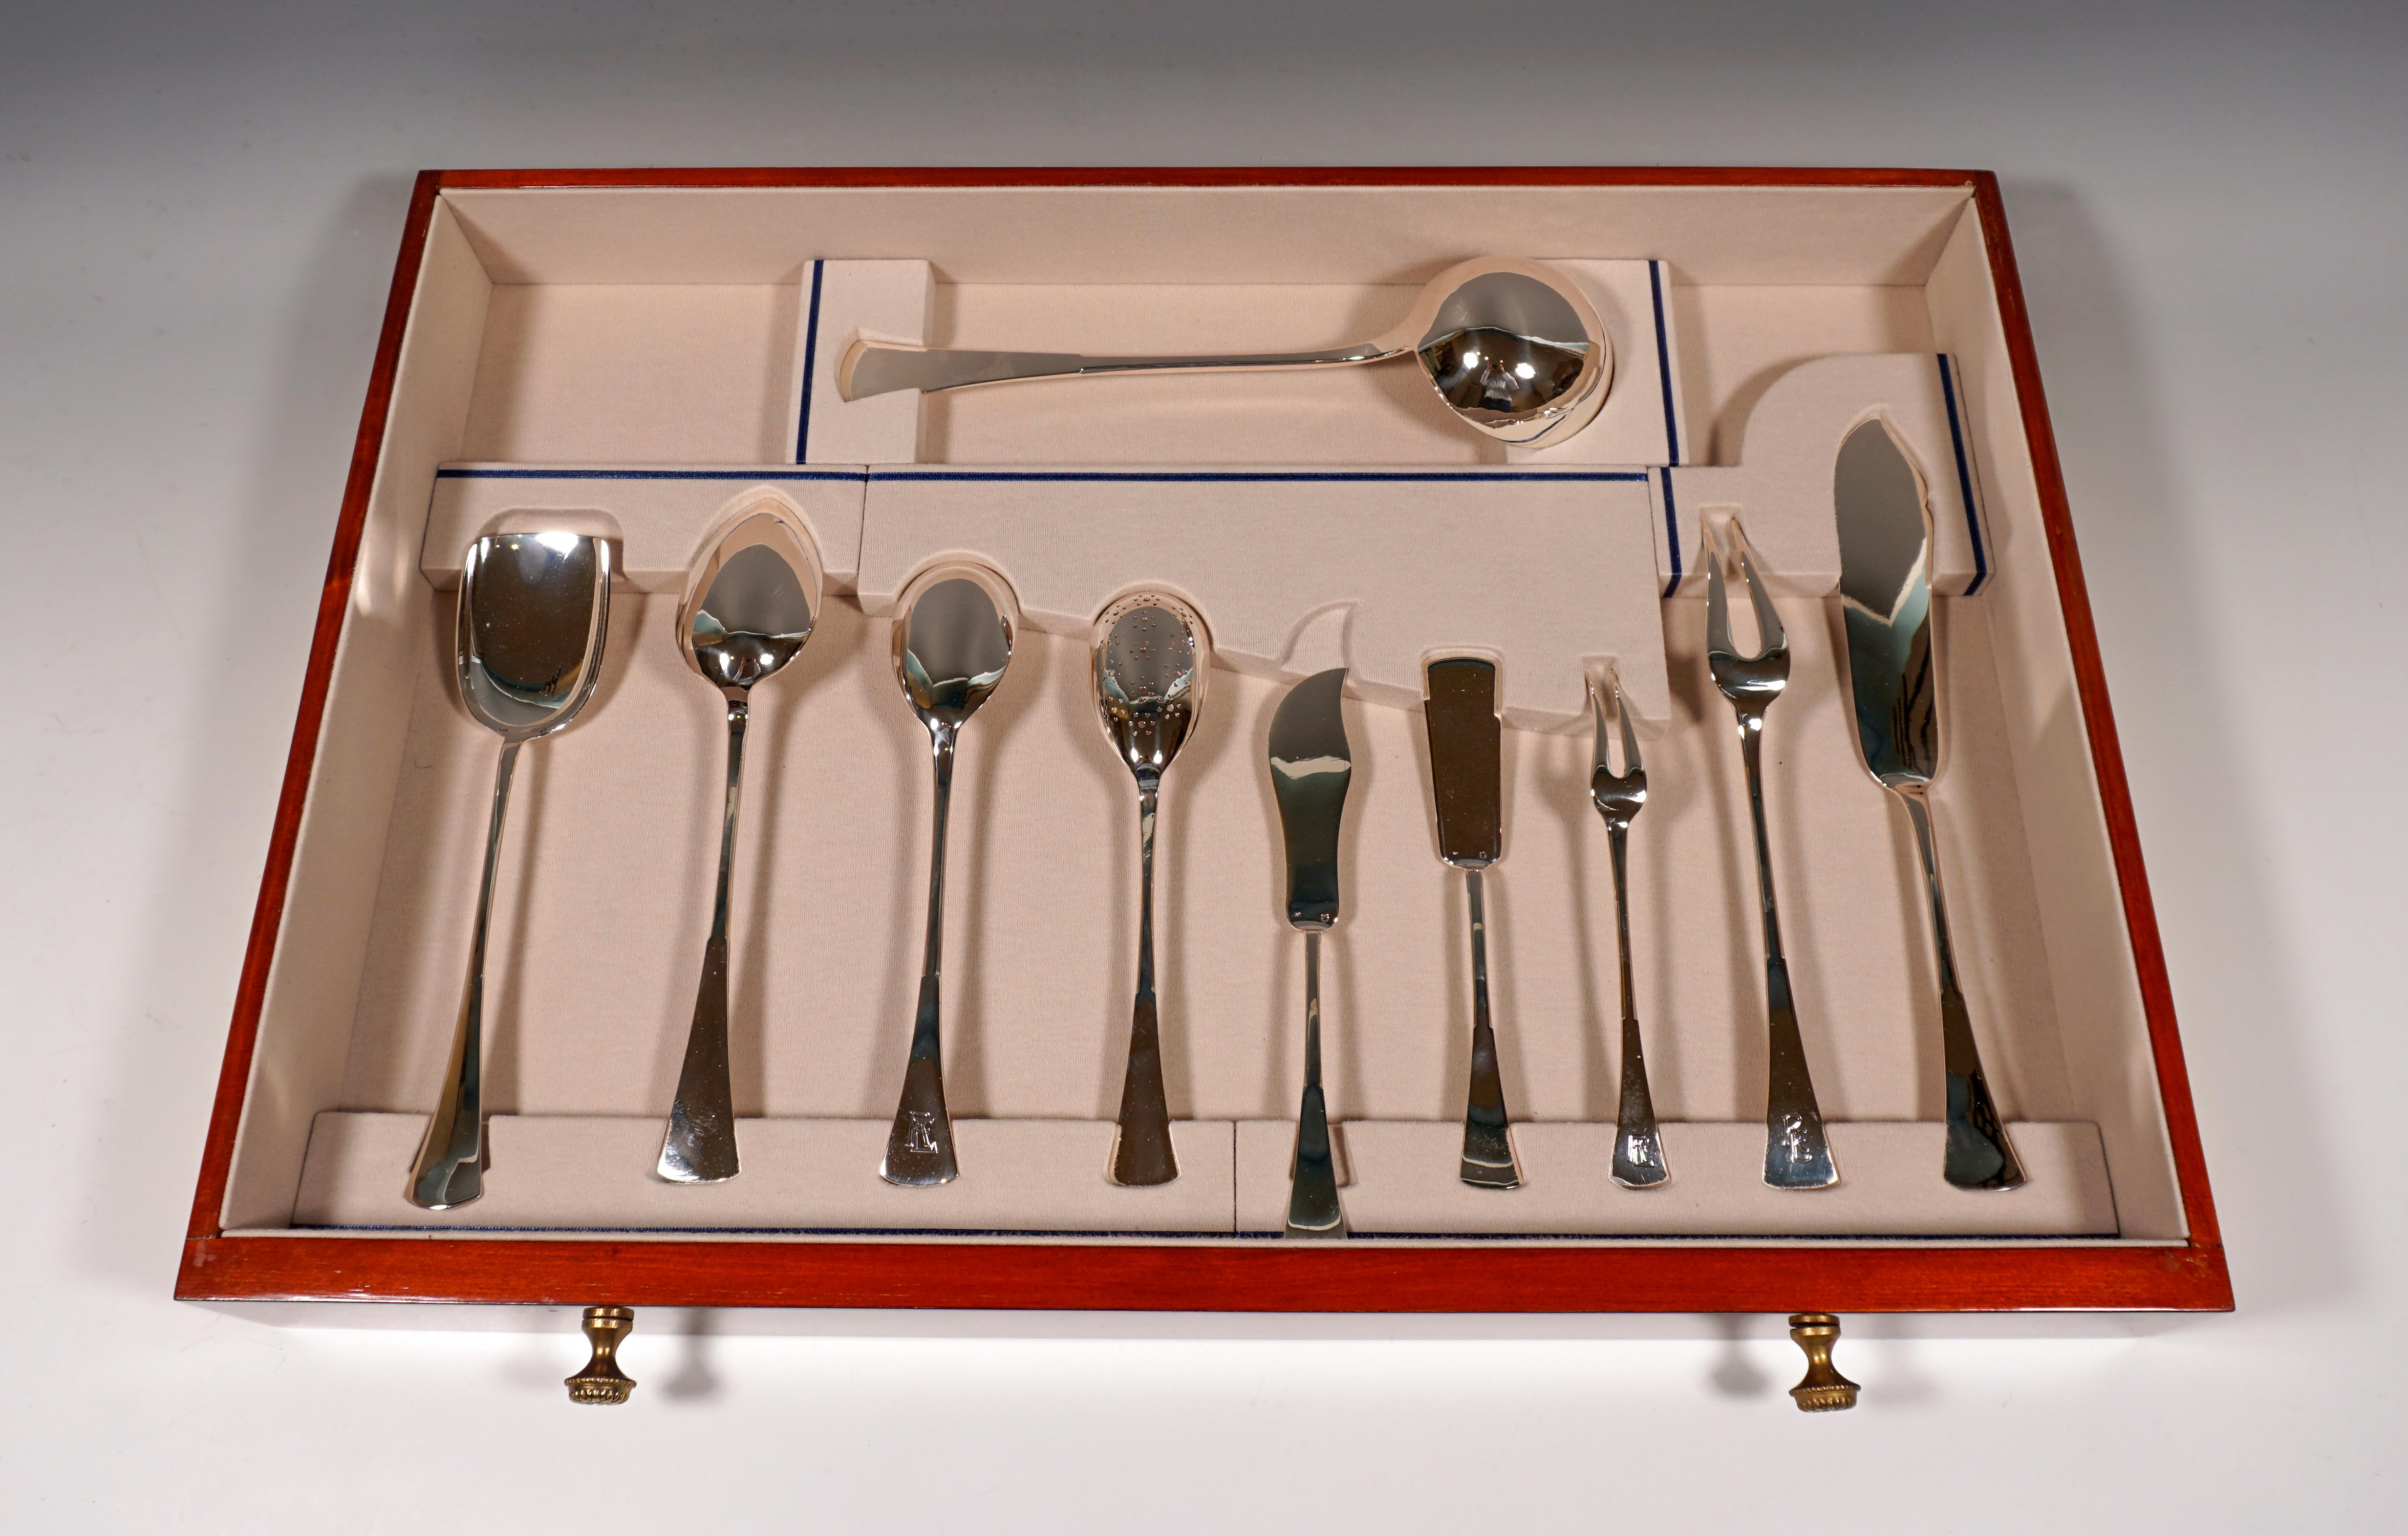 Early 20th Century Art Nouveau Silver Cutlery Set For 12 People In Showcase, Austria-Hungary, 1920